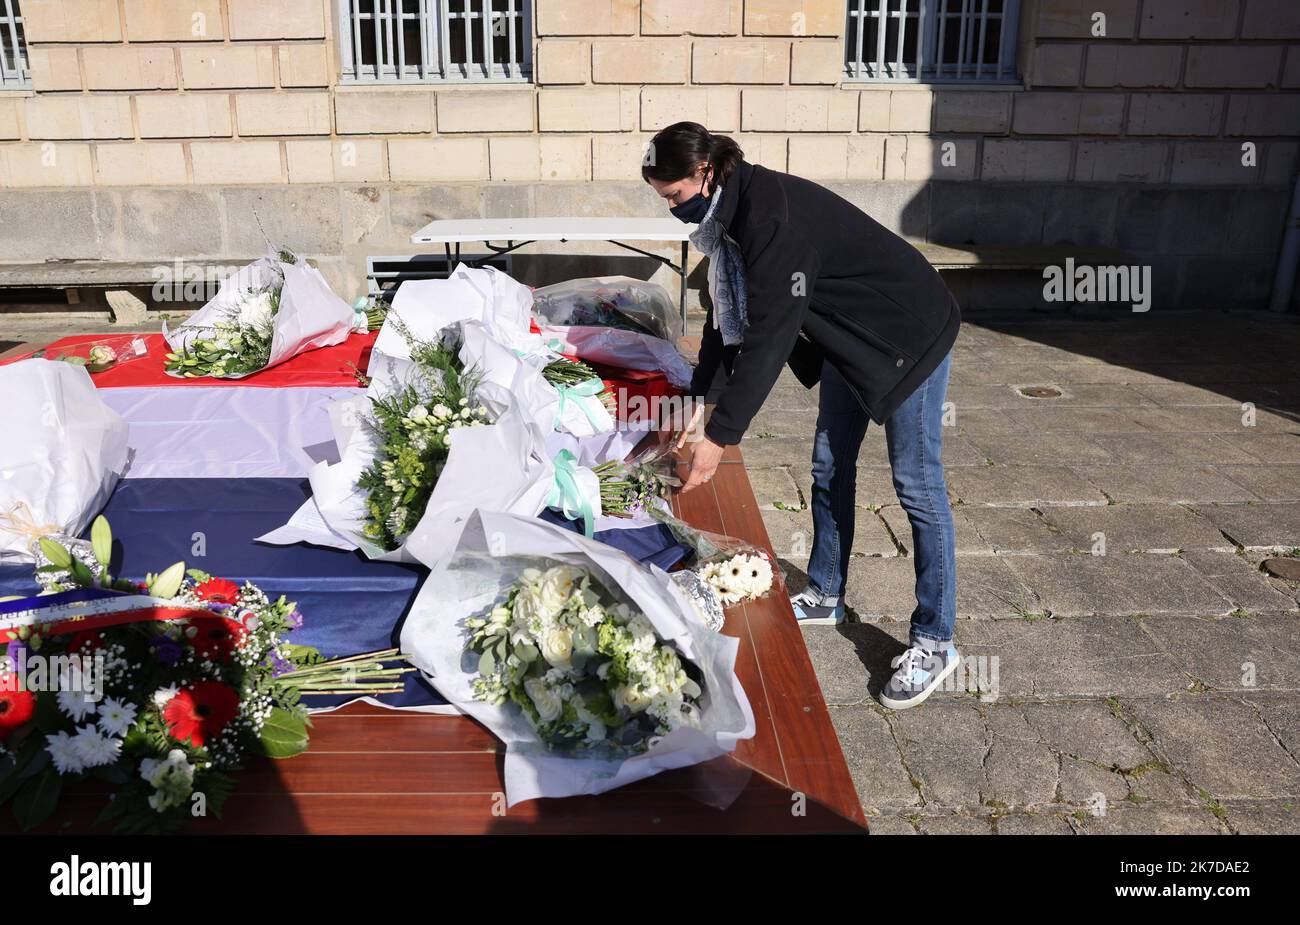 ©PHOTOPQR/LE PARISIEN/Arnaud Journois ; RAMBOUILLET ; 26/04/2021 ; HOMMAGE A STEPHANIE MONFERME , FONCTIONNAIRE DE POLICE ASSASSINNE A RAMBOUILLET , SUR LE PARVIS DE L'HOTEL DE VILLE EN PRESENCE DE GERALD DARMANIN , MARLENE SCHIAPPA ET GERARD LARCHER - Rambouillet, France, april 26th 2021 An official tribute is to be paid by the town hall of Rambouillet to Stephanie M. on 26 April. The rally will take place in front of the police station, where she was murdered. Stock Photo